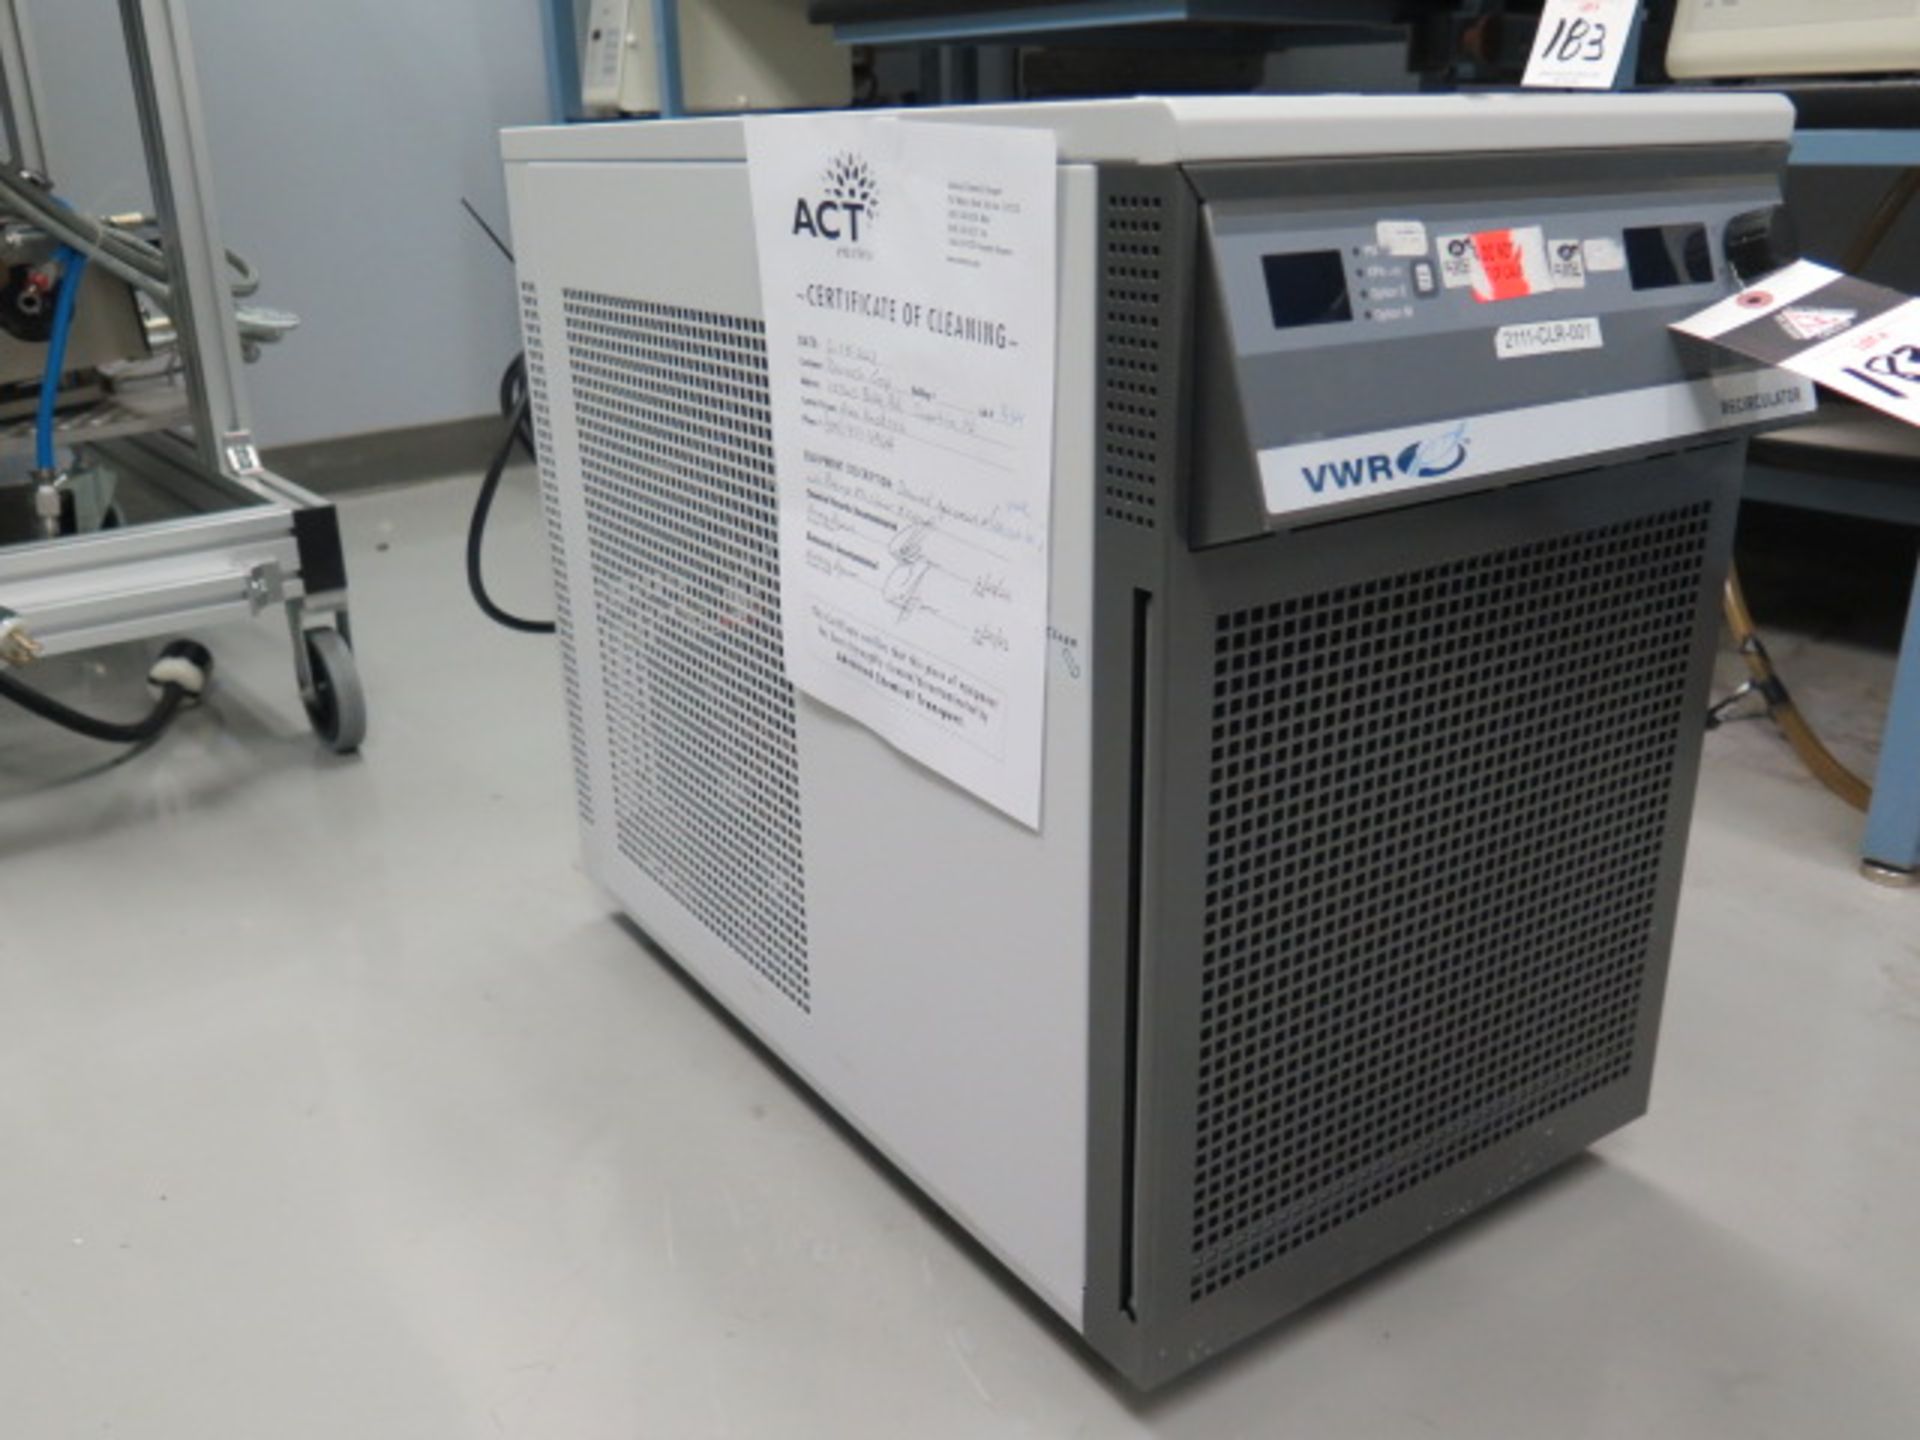 VWR mdl. 1179PD “Recirculator” Refrigerated Cooling System s/n SM1490532 (SOLD AS-IS - NO WARRANTY) - Image 7 of 13